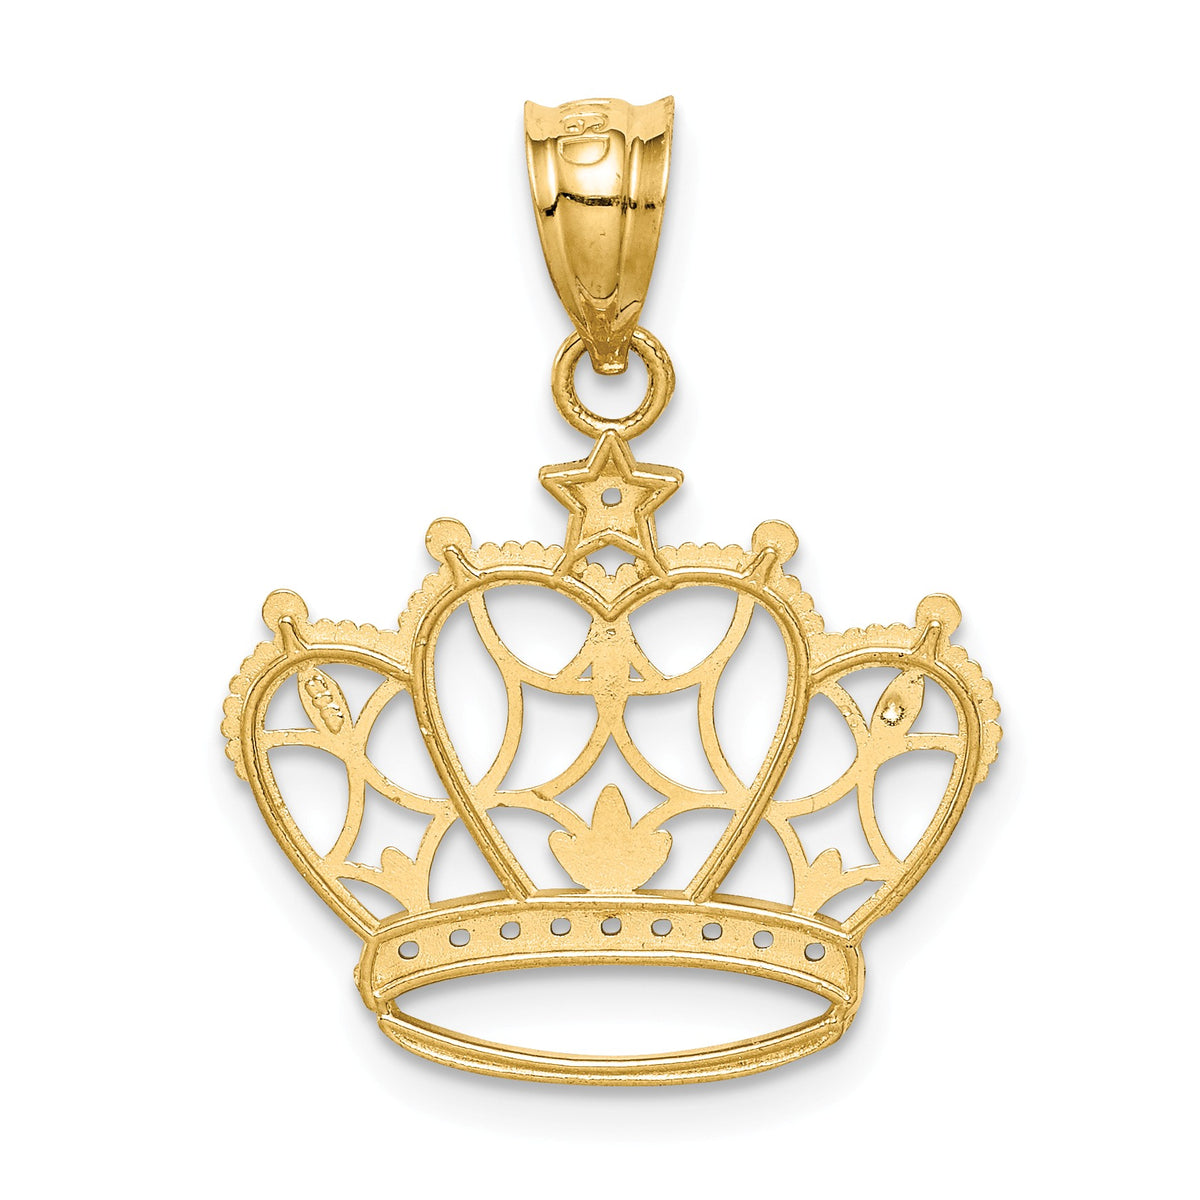 Alternate view of the 14k Yellow Gold and White Rhodium Two Tone Crown Pendant, 19mm by The Black Bow Jewelry Co.